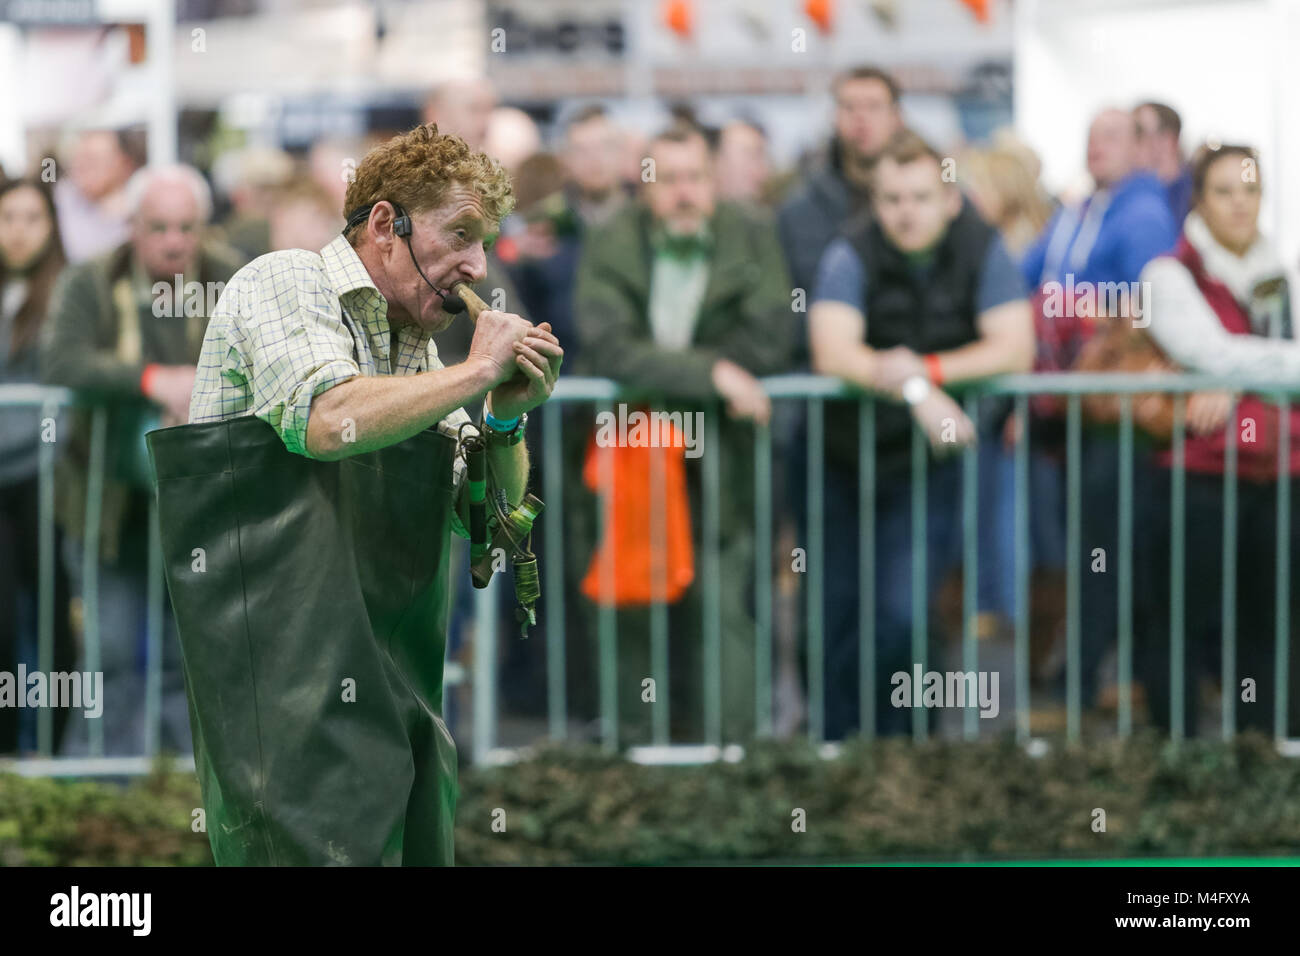 man demonstrating how to decoy for duck hunting at great british shooting show nec Stock Photo